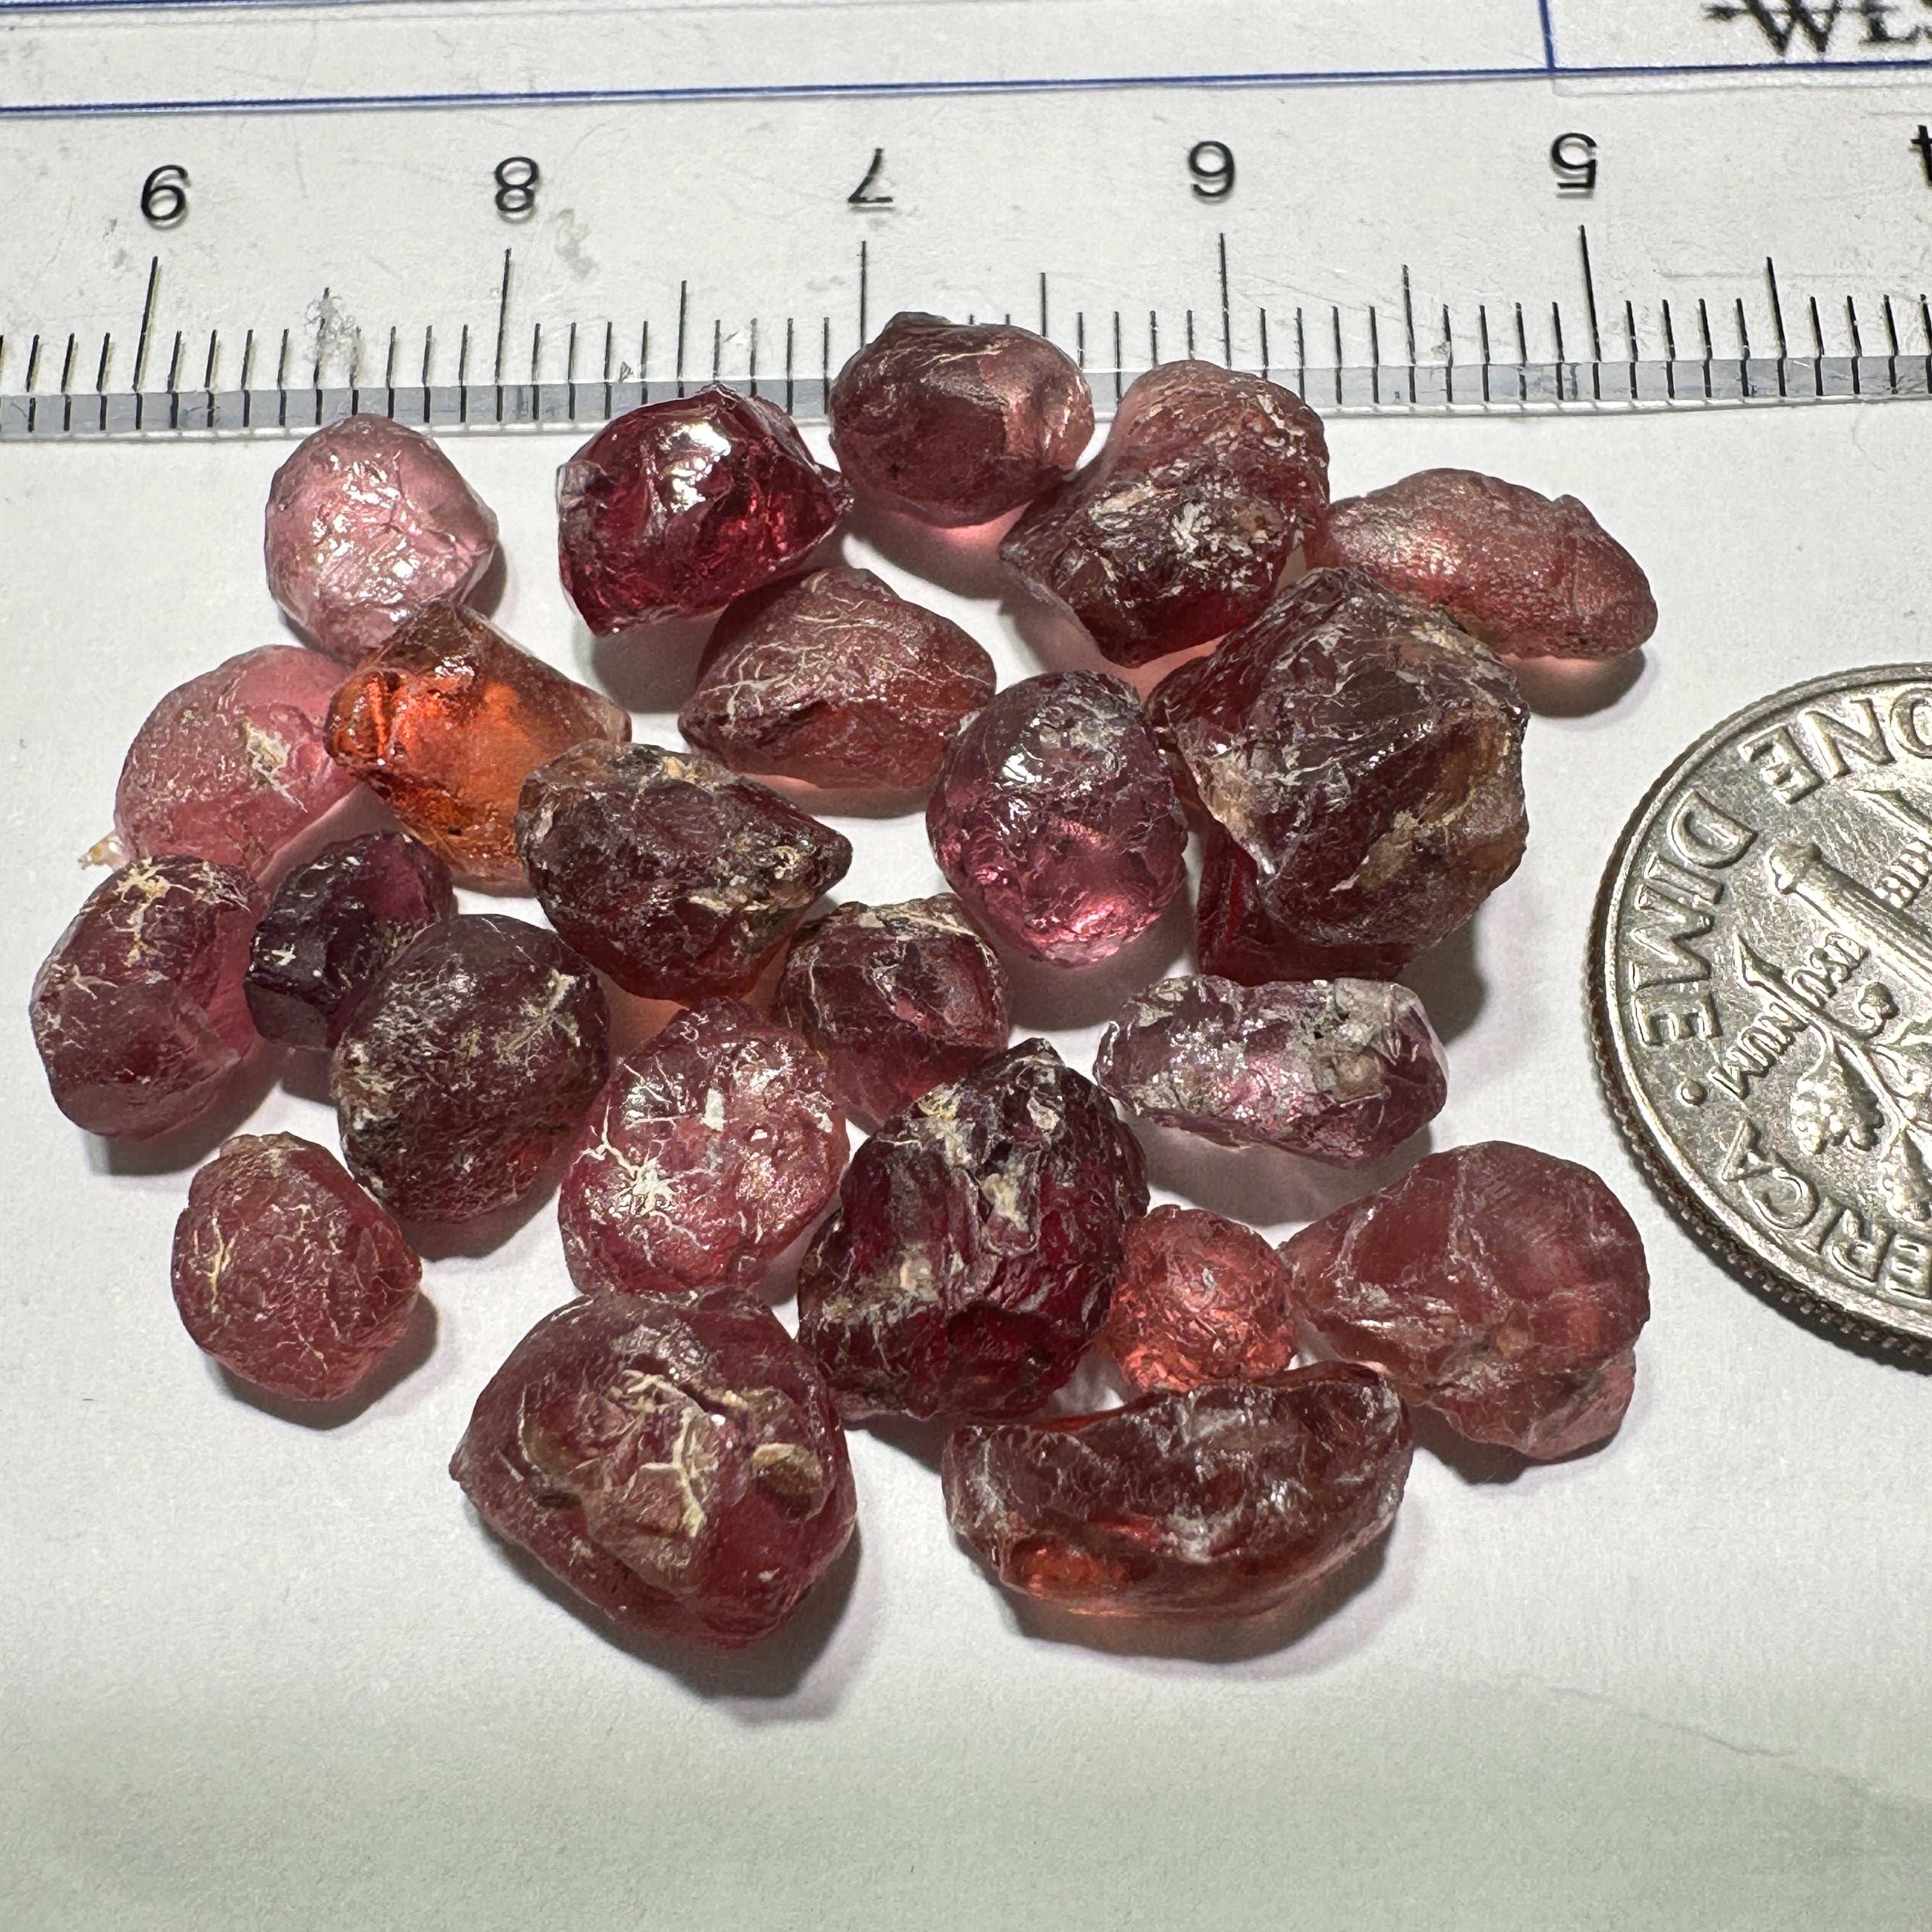 53.82ct Champagne Garnet Lot, Tanzania. 0.79ct-7.23ct. Included, Untreated Unheated